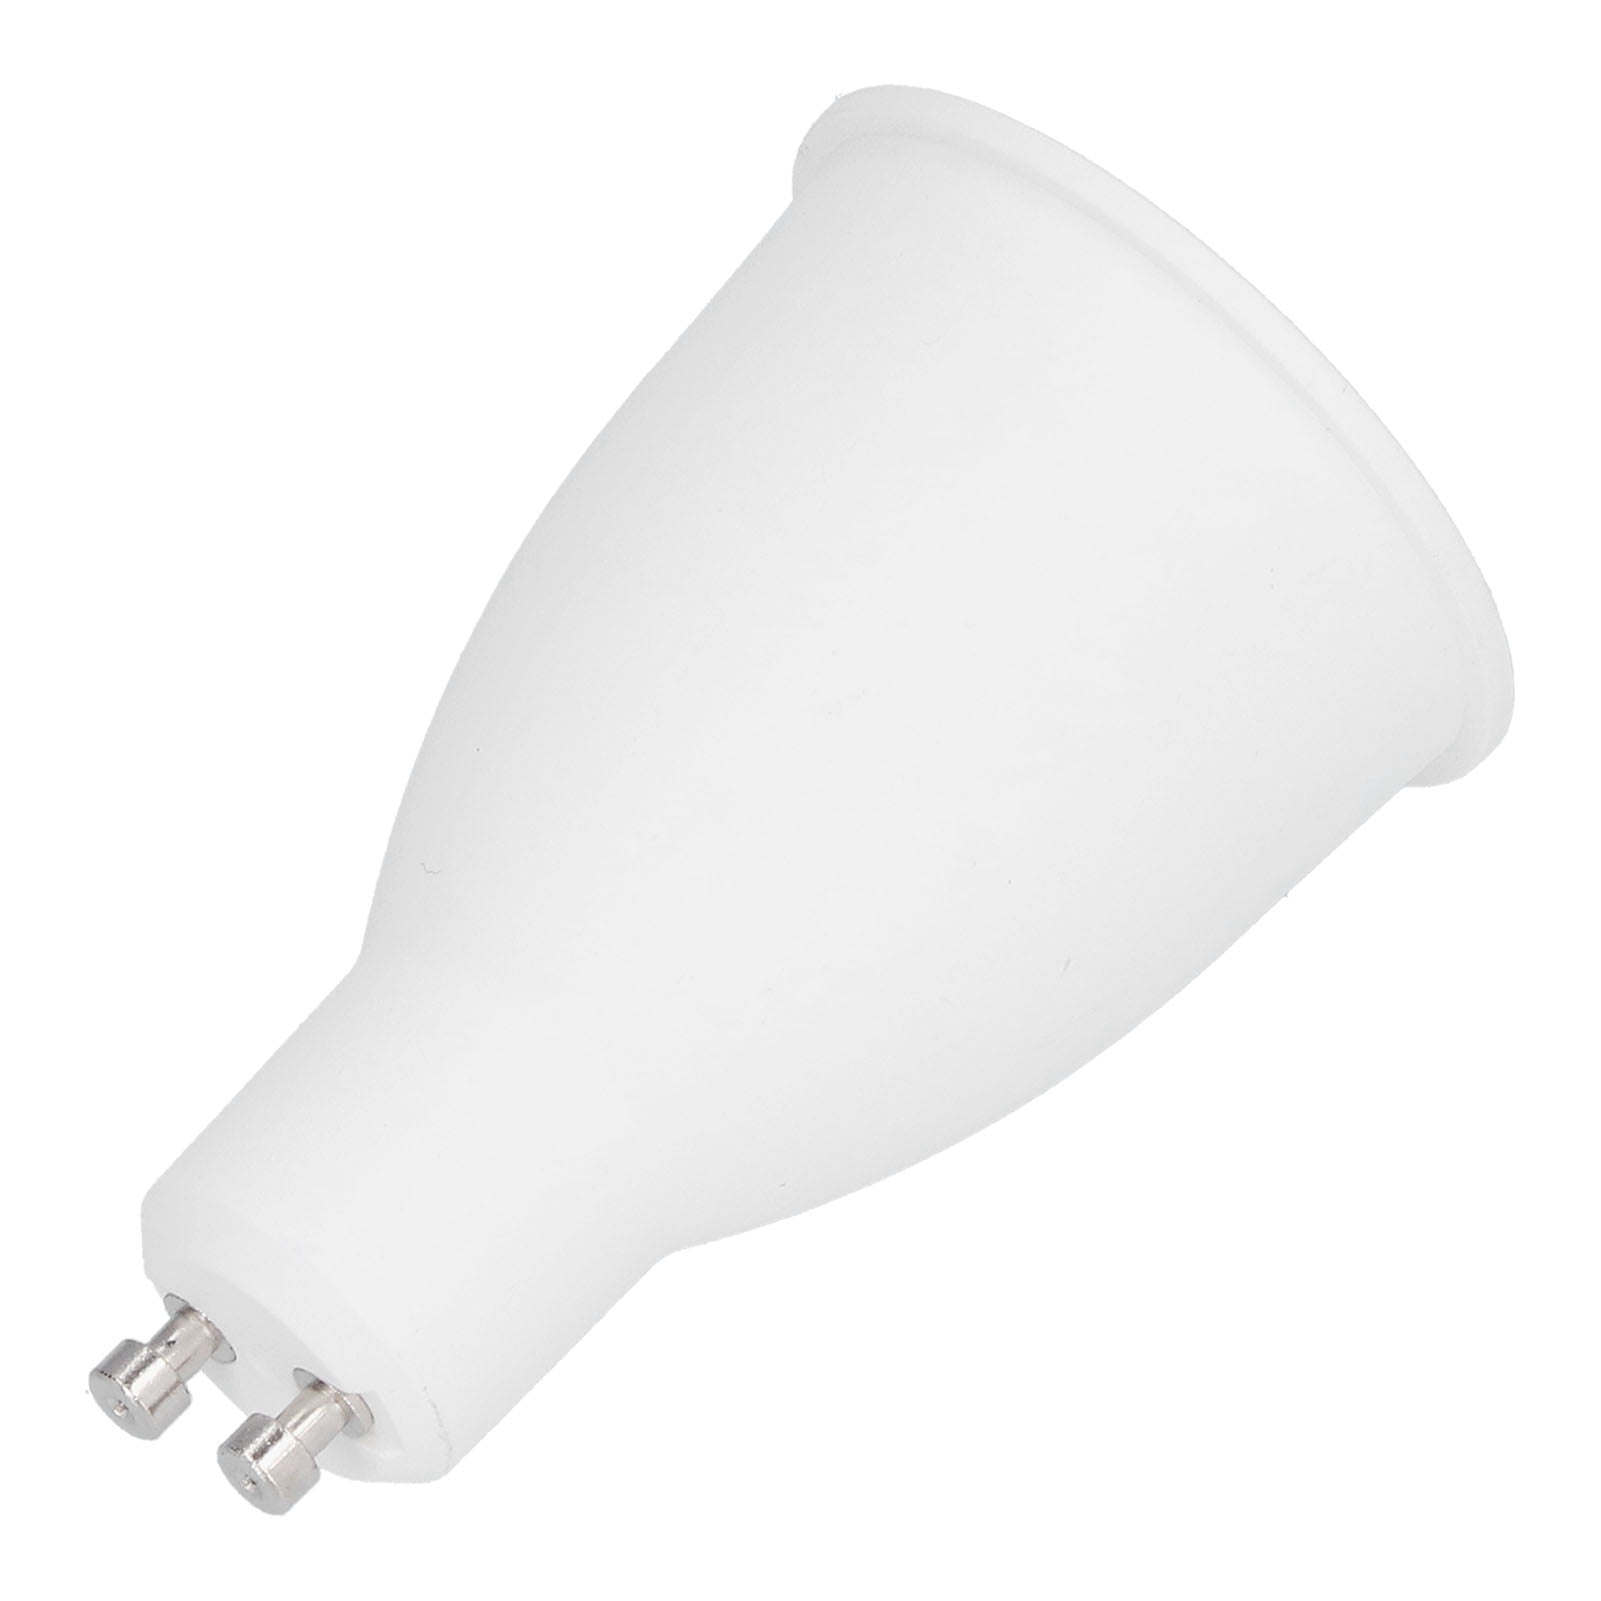 Incessant Saturate In the mercy of LED Bulb, 15W 1650lm LED Spot Light Bulb Bright GU10 For Home For Office -  Walmart.com